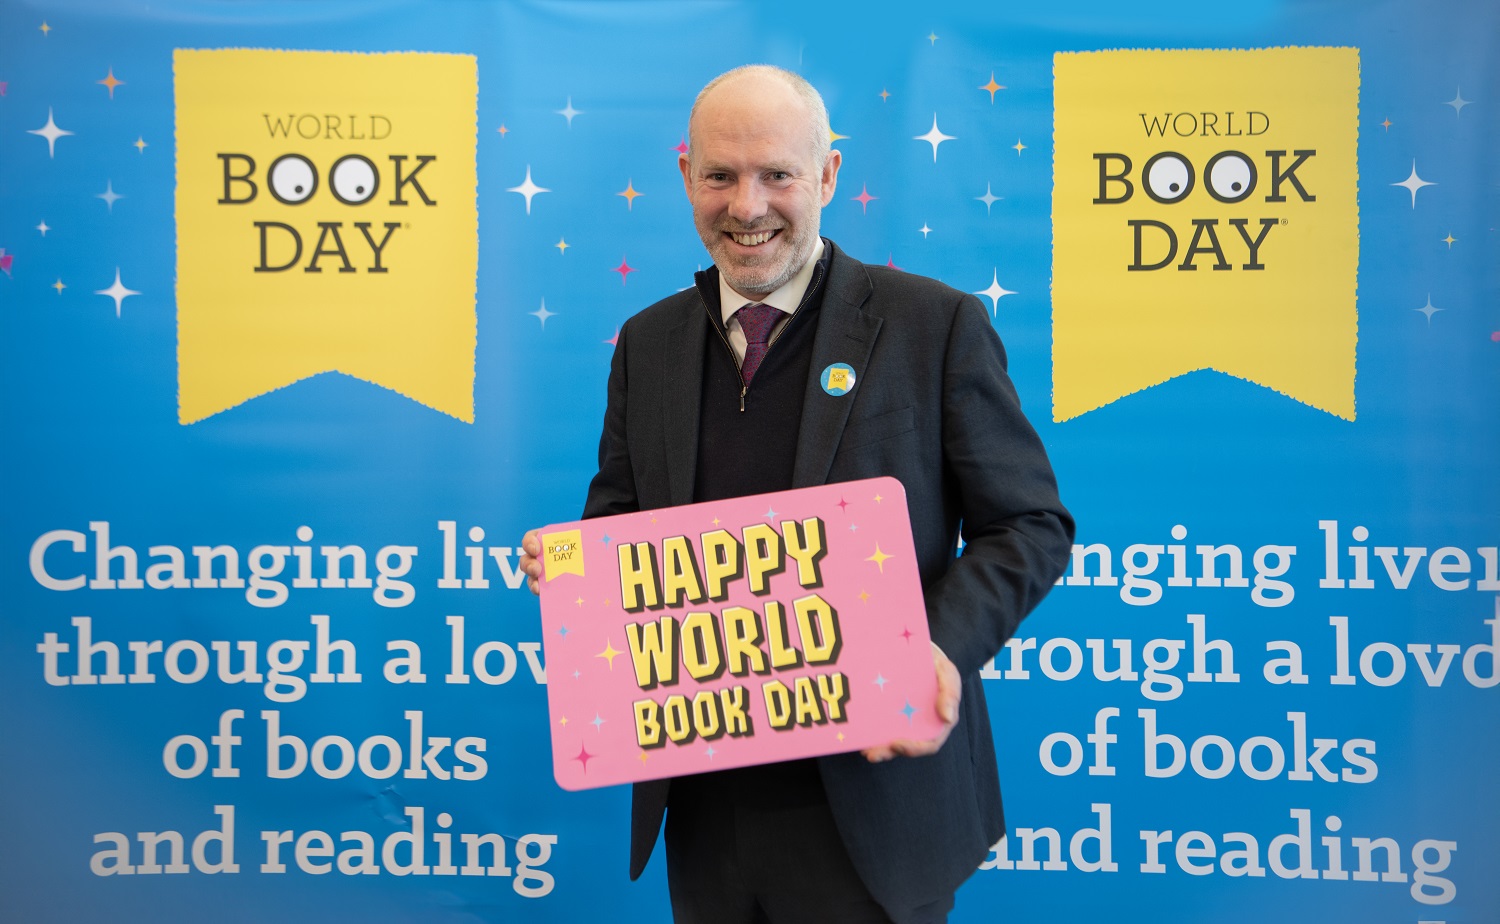 Justin Joins World Book Day Celebrations